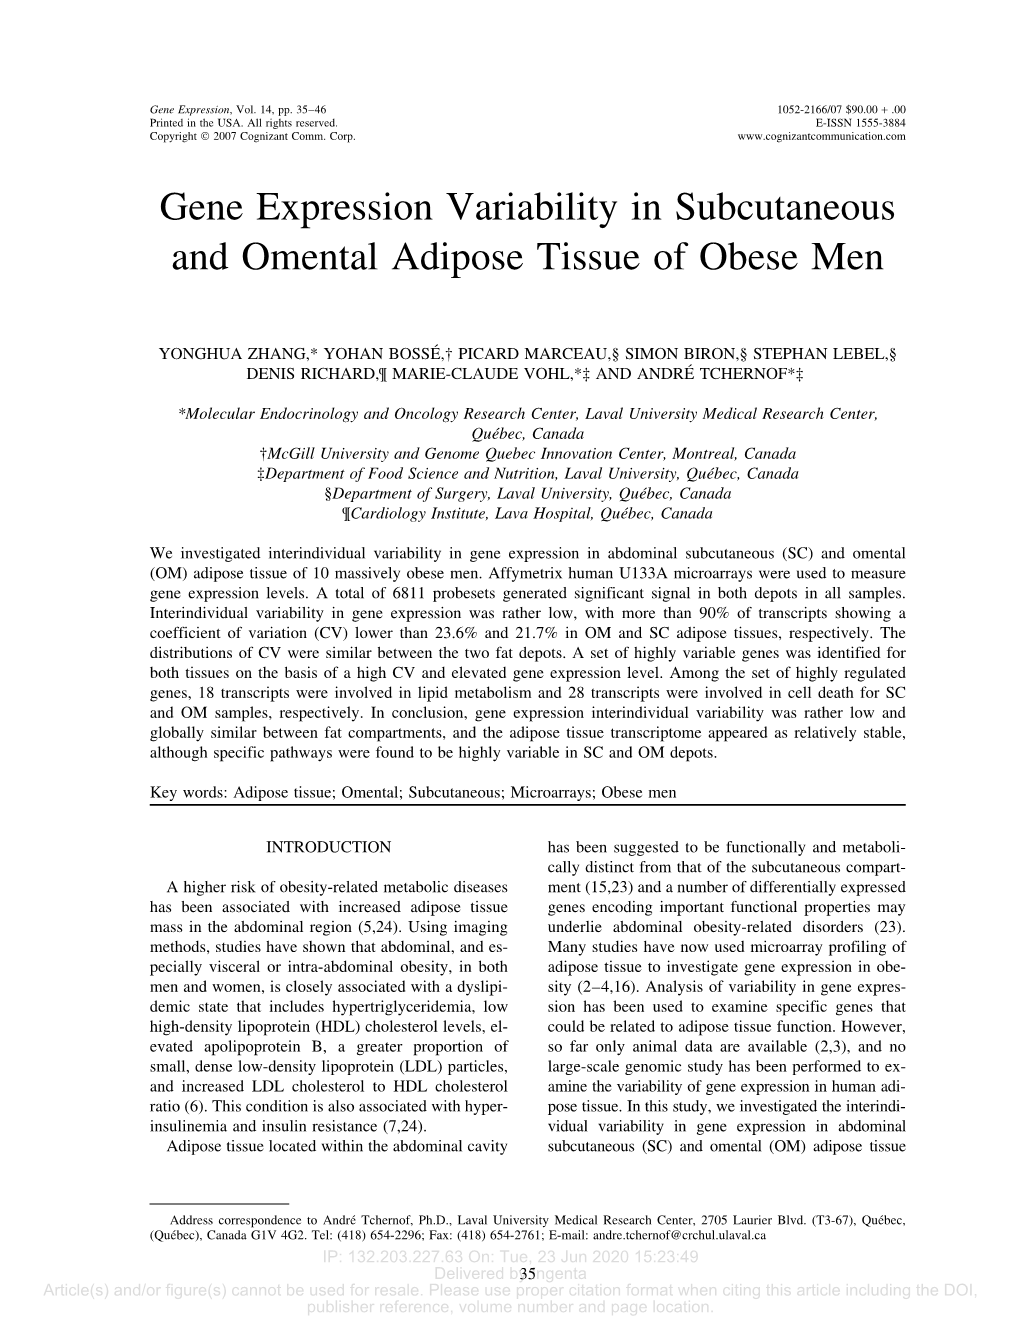 Gene Expression Variability in Subcutaneous and Omental Adipose Tissue of Obese Men